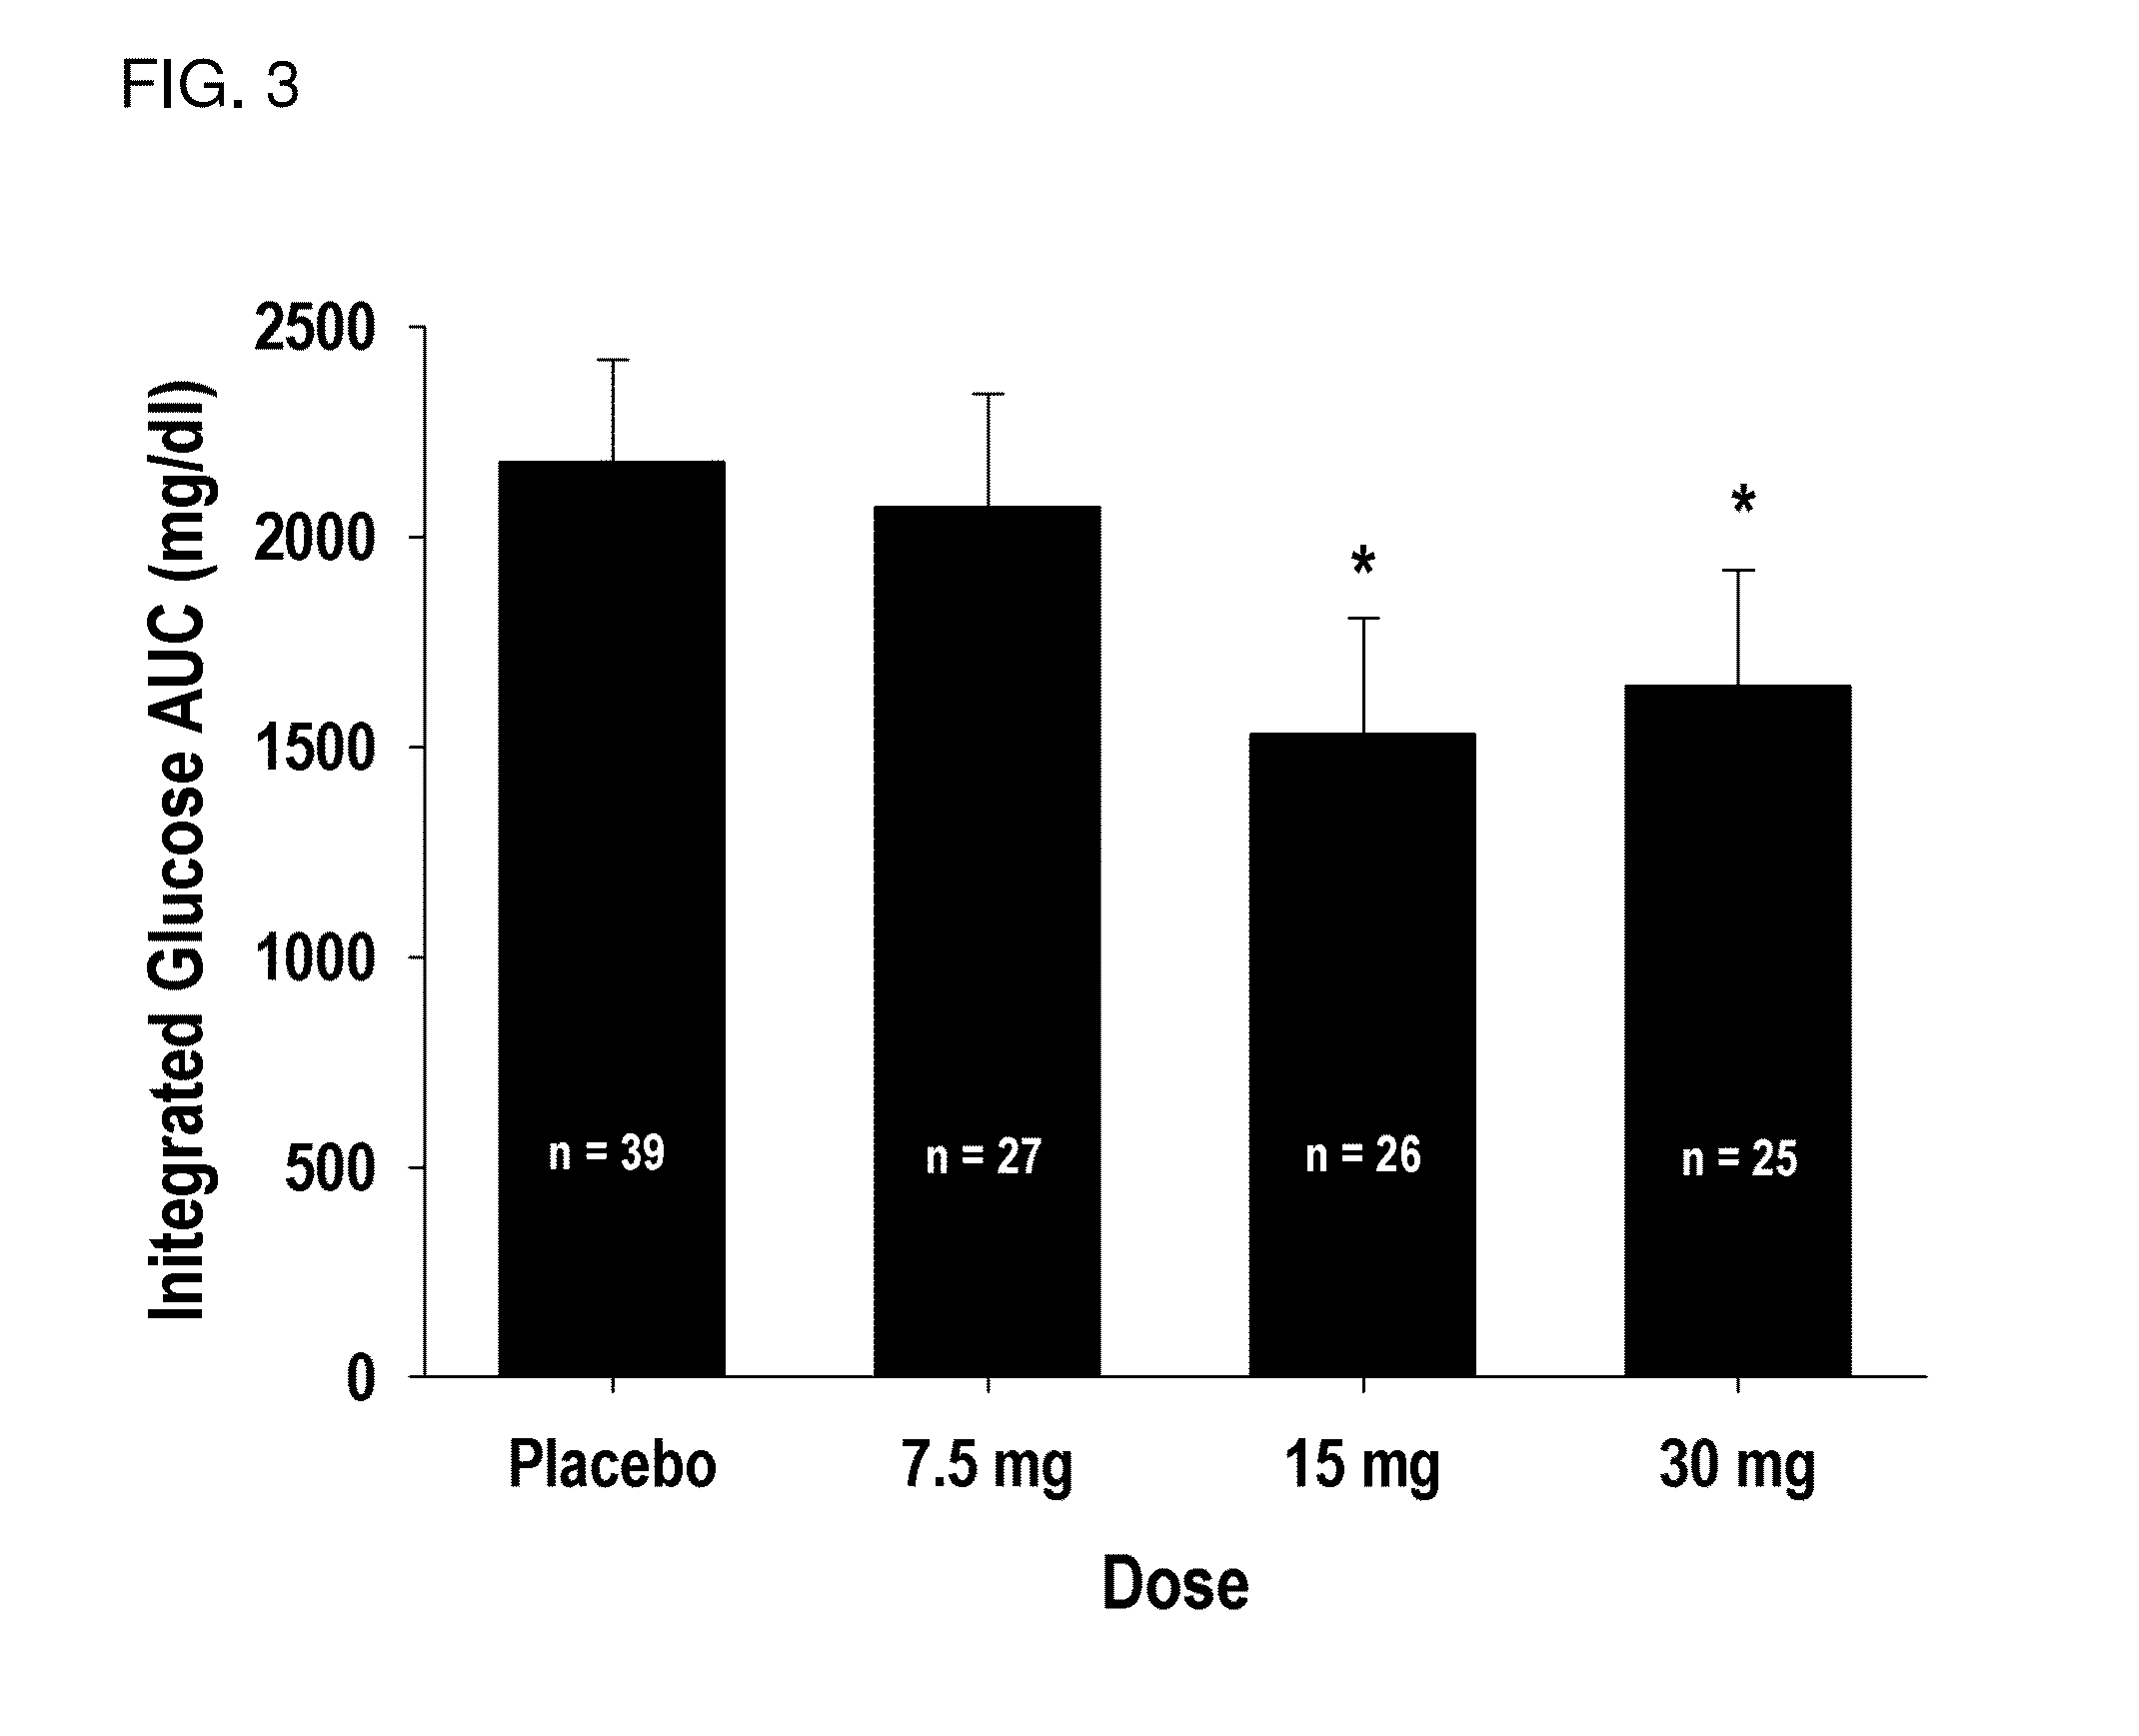 Composition and Method for Reducing Post-Prandial Blood Glucose